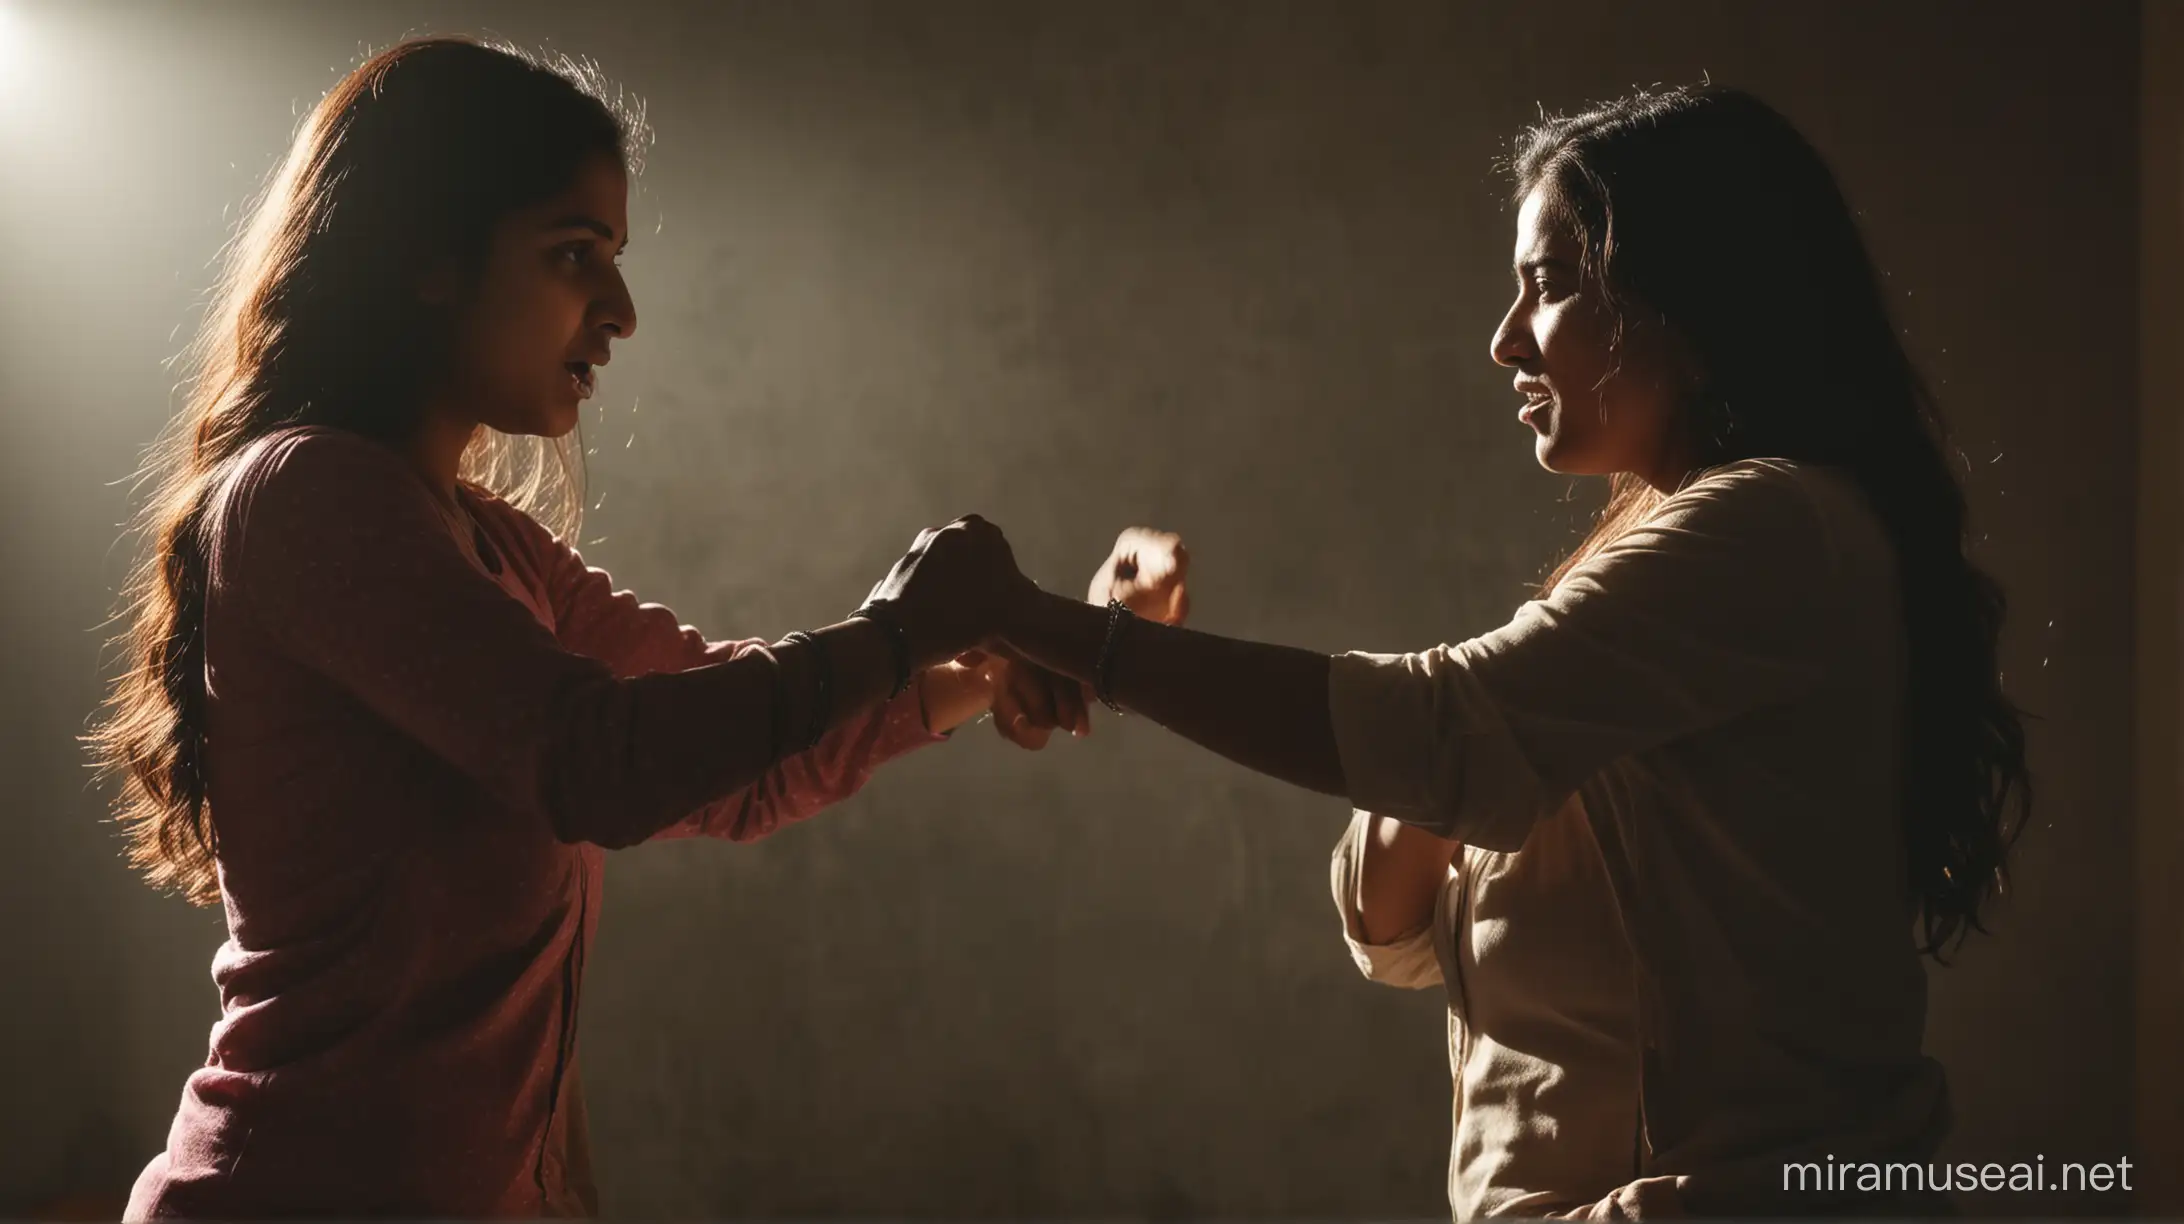 22 years indian old girl fight with her mother, backlight, dark room, 